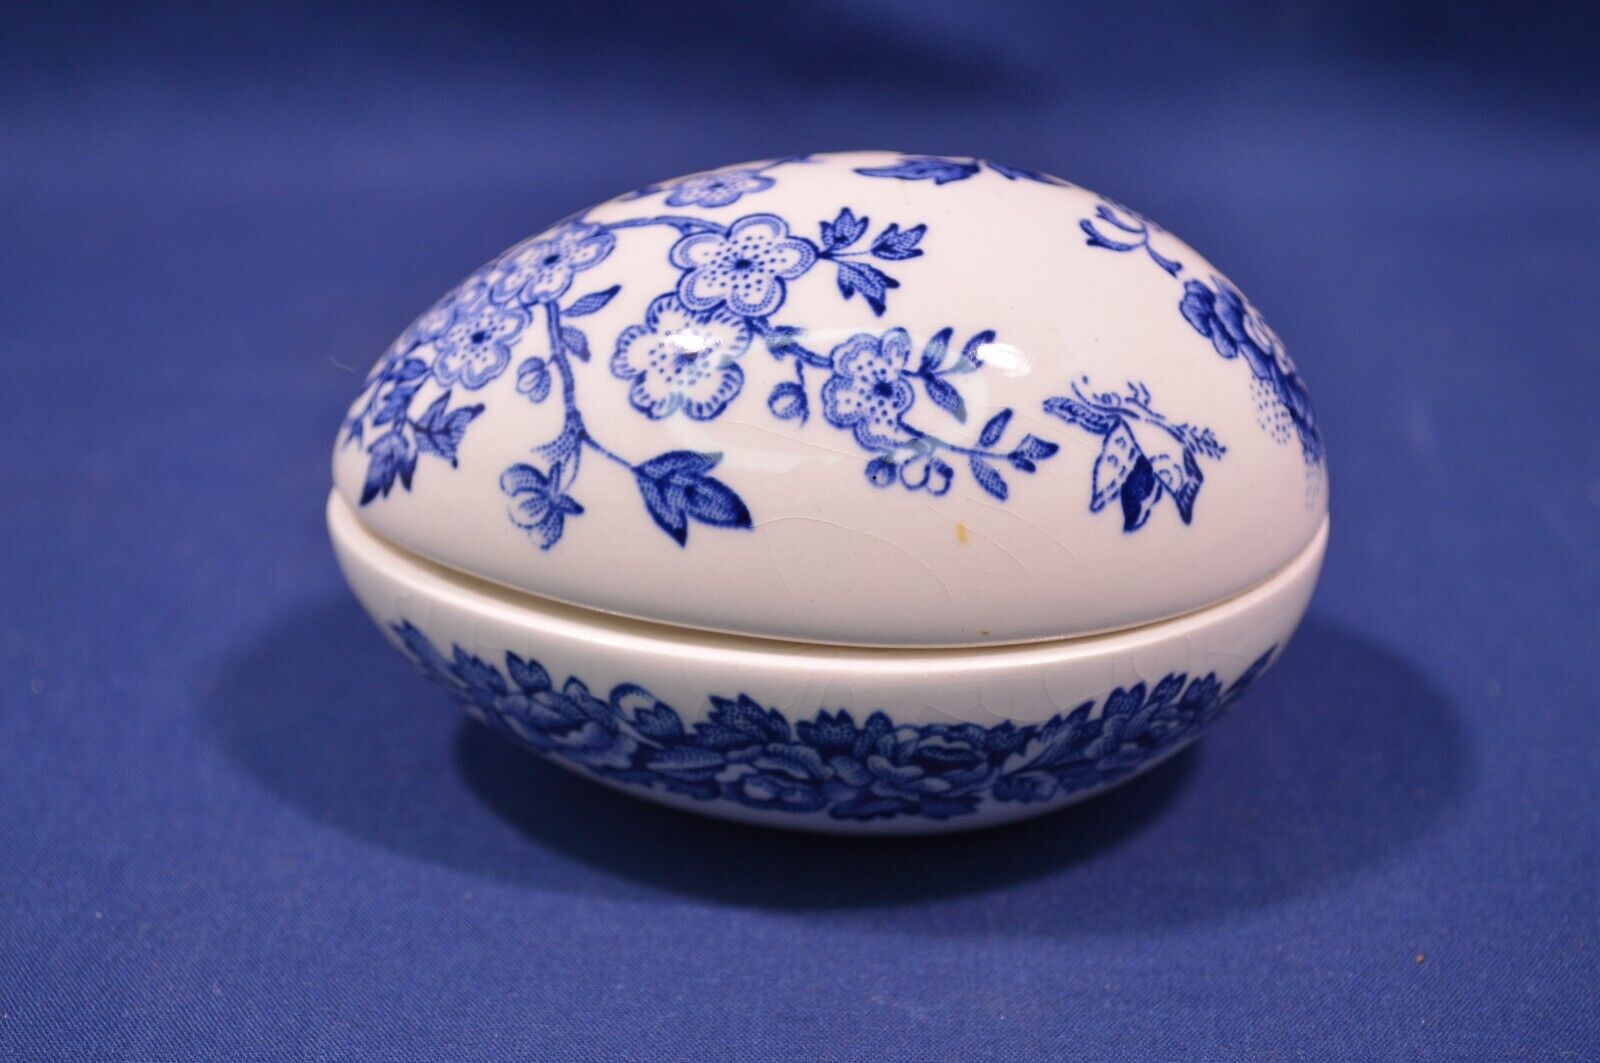 Vintage Masons England Collectible Egg,Blue Floral Trinket Dish,Beautifully Made